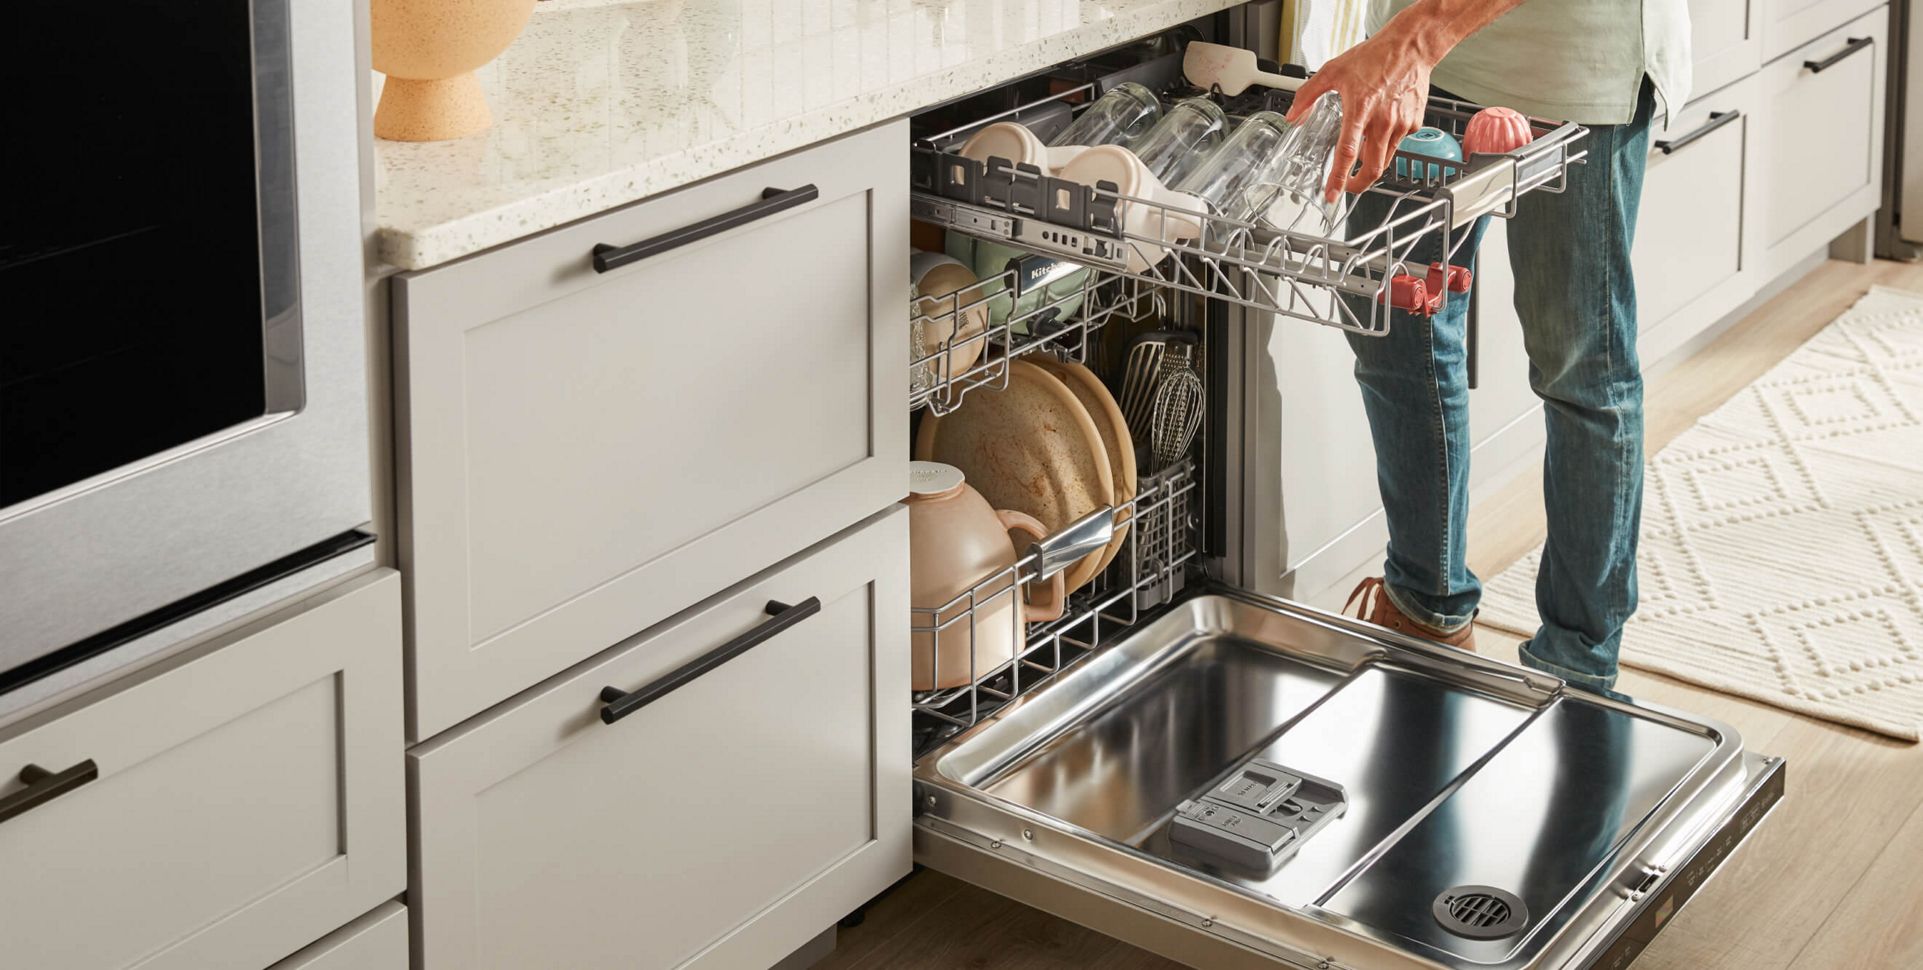 How to Install a New Dishwasher